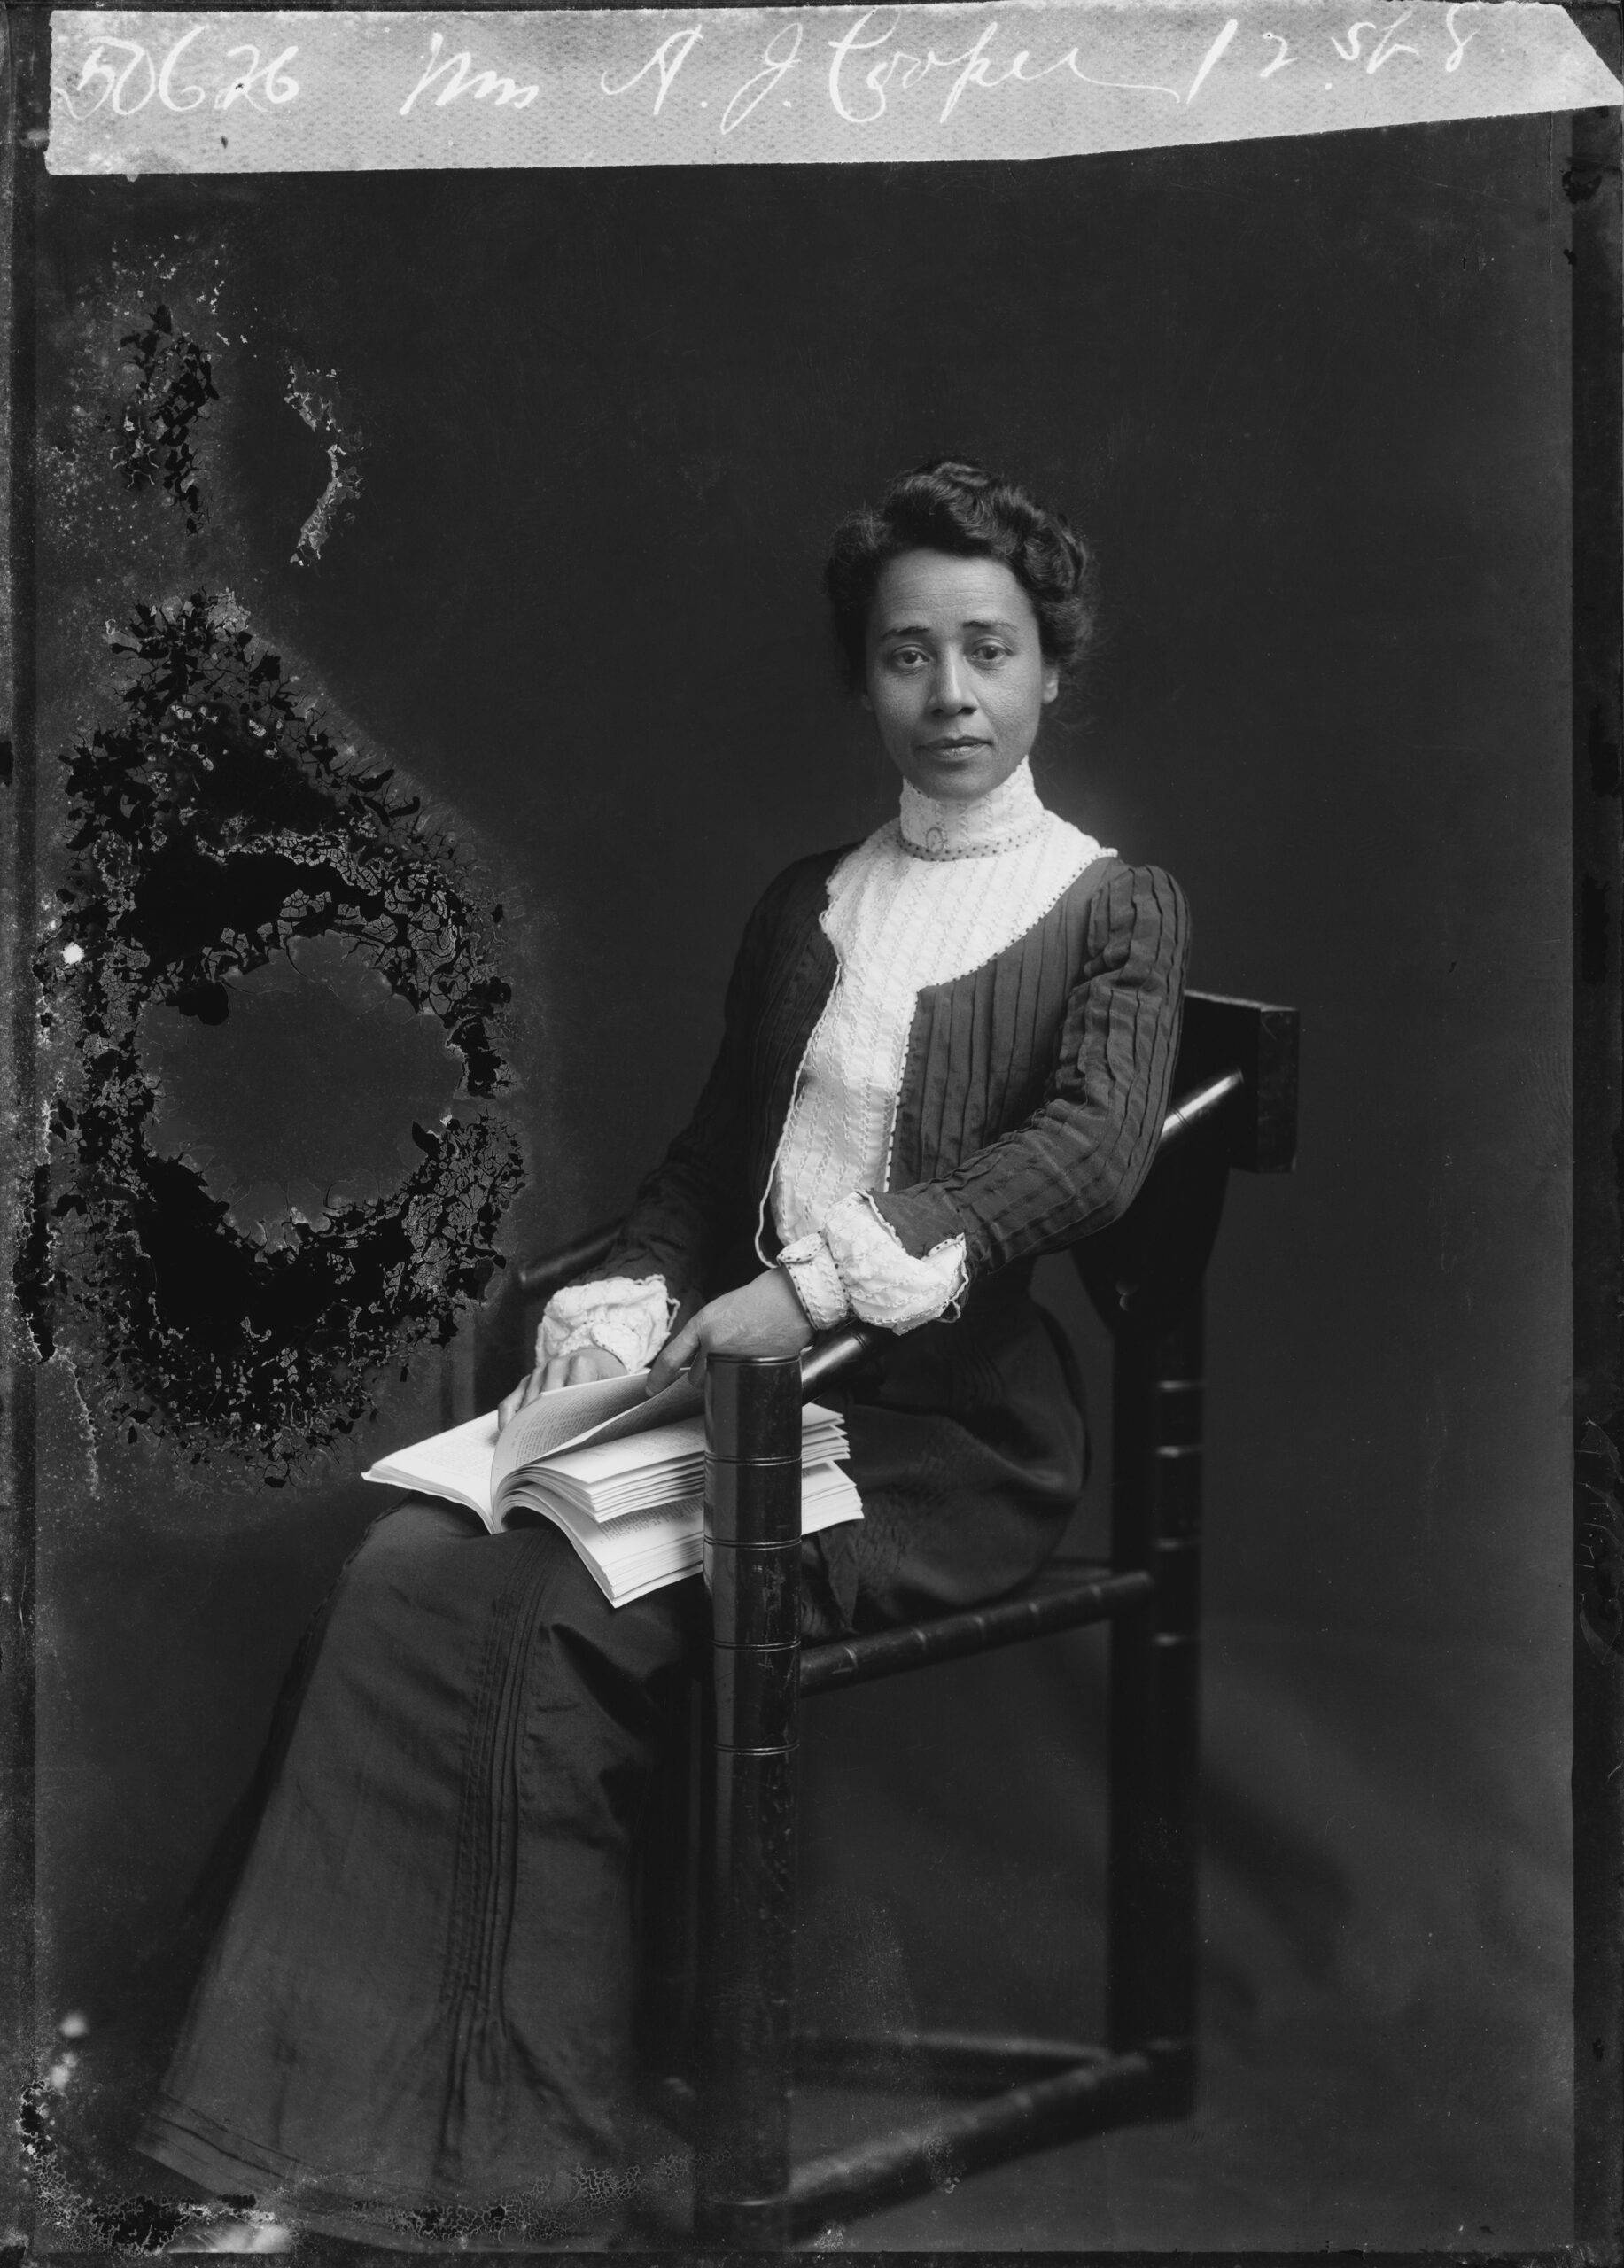 Educator and civil rights activist Anna Julia Cooper (1858-1964) poses for a photo while sitting with book on her lap circa 1902 in Washington DC.